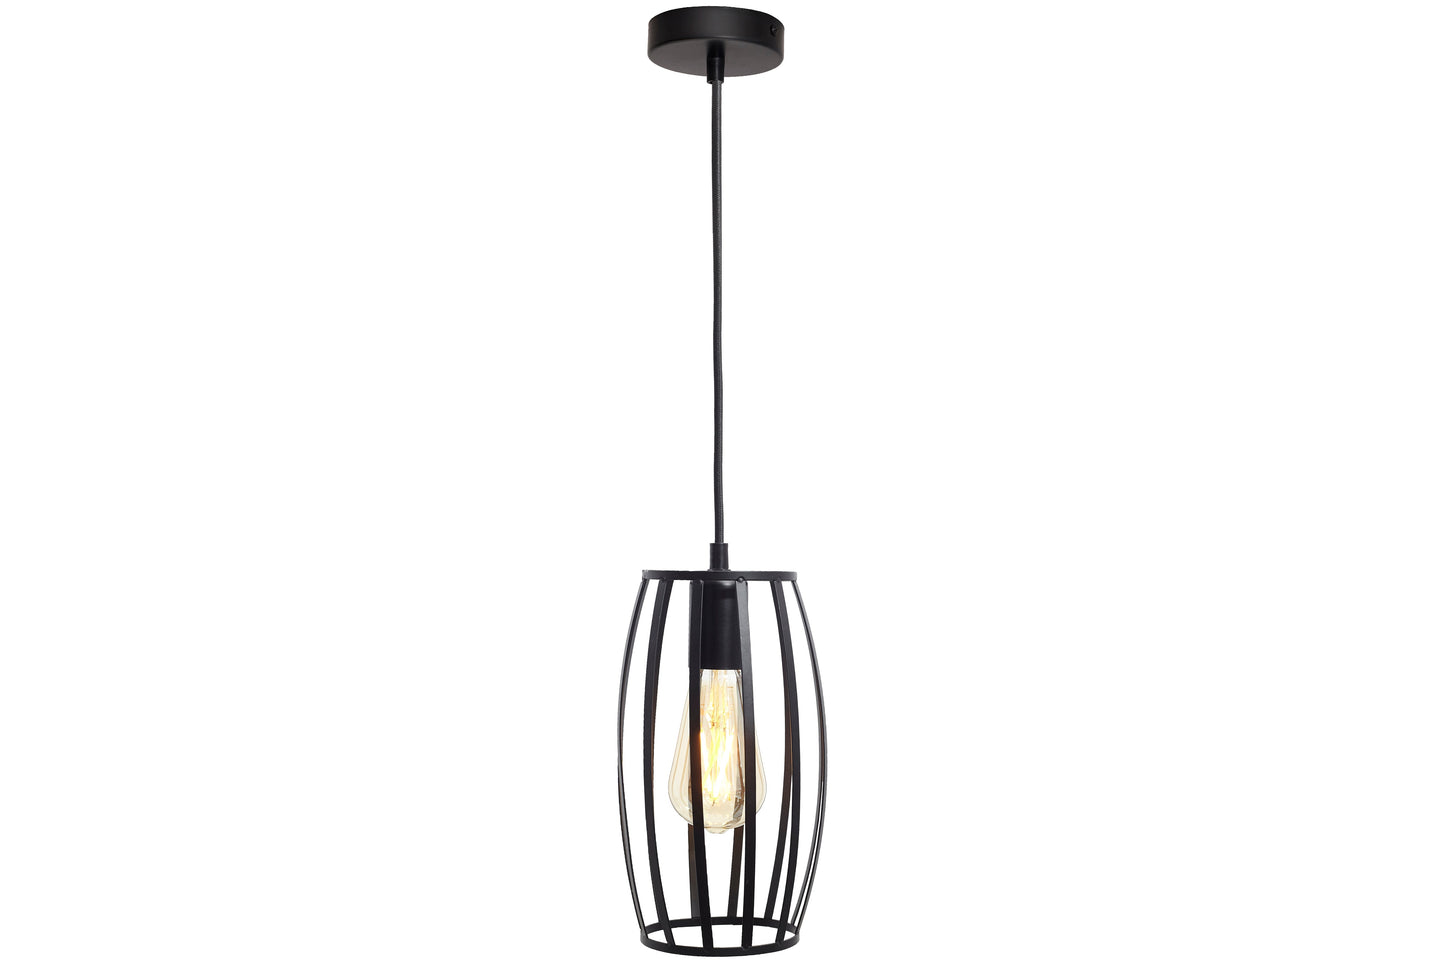 4lite Decorative Pear Cage Lighting Pendant for E27 Large Screw Fit Lamp (Bulb Not Included) - Matte Black - maplin.co.uk